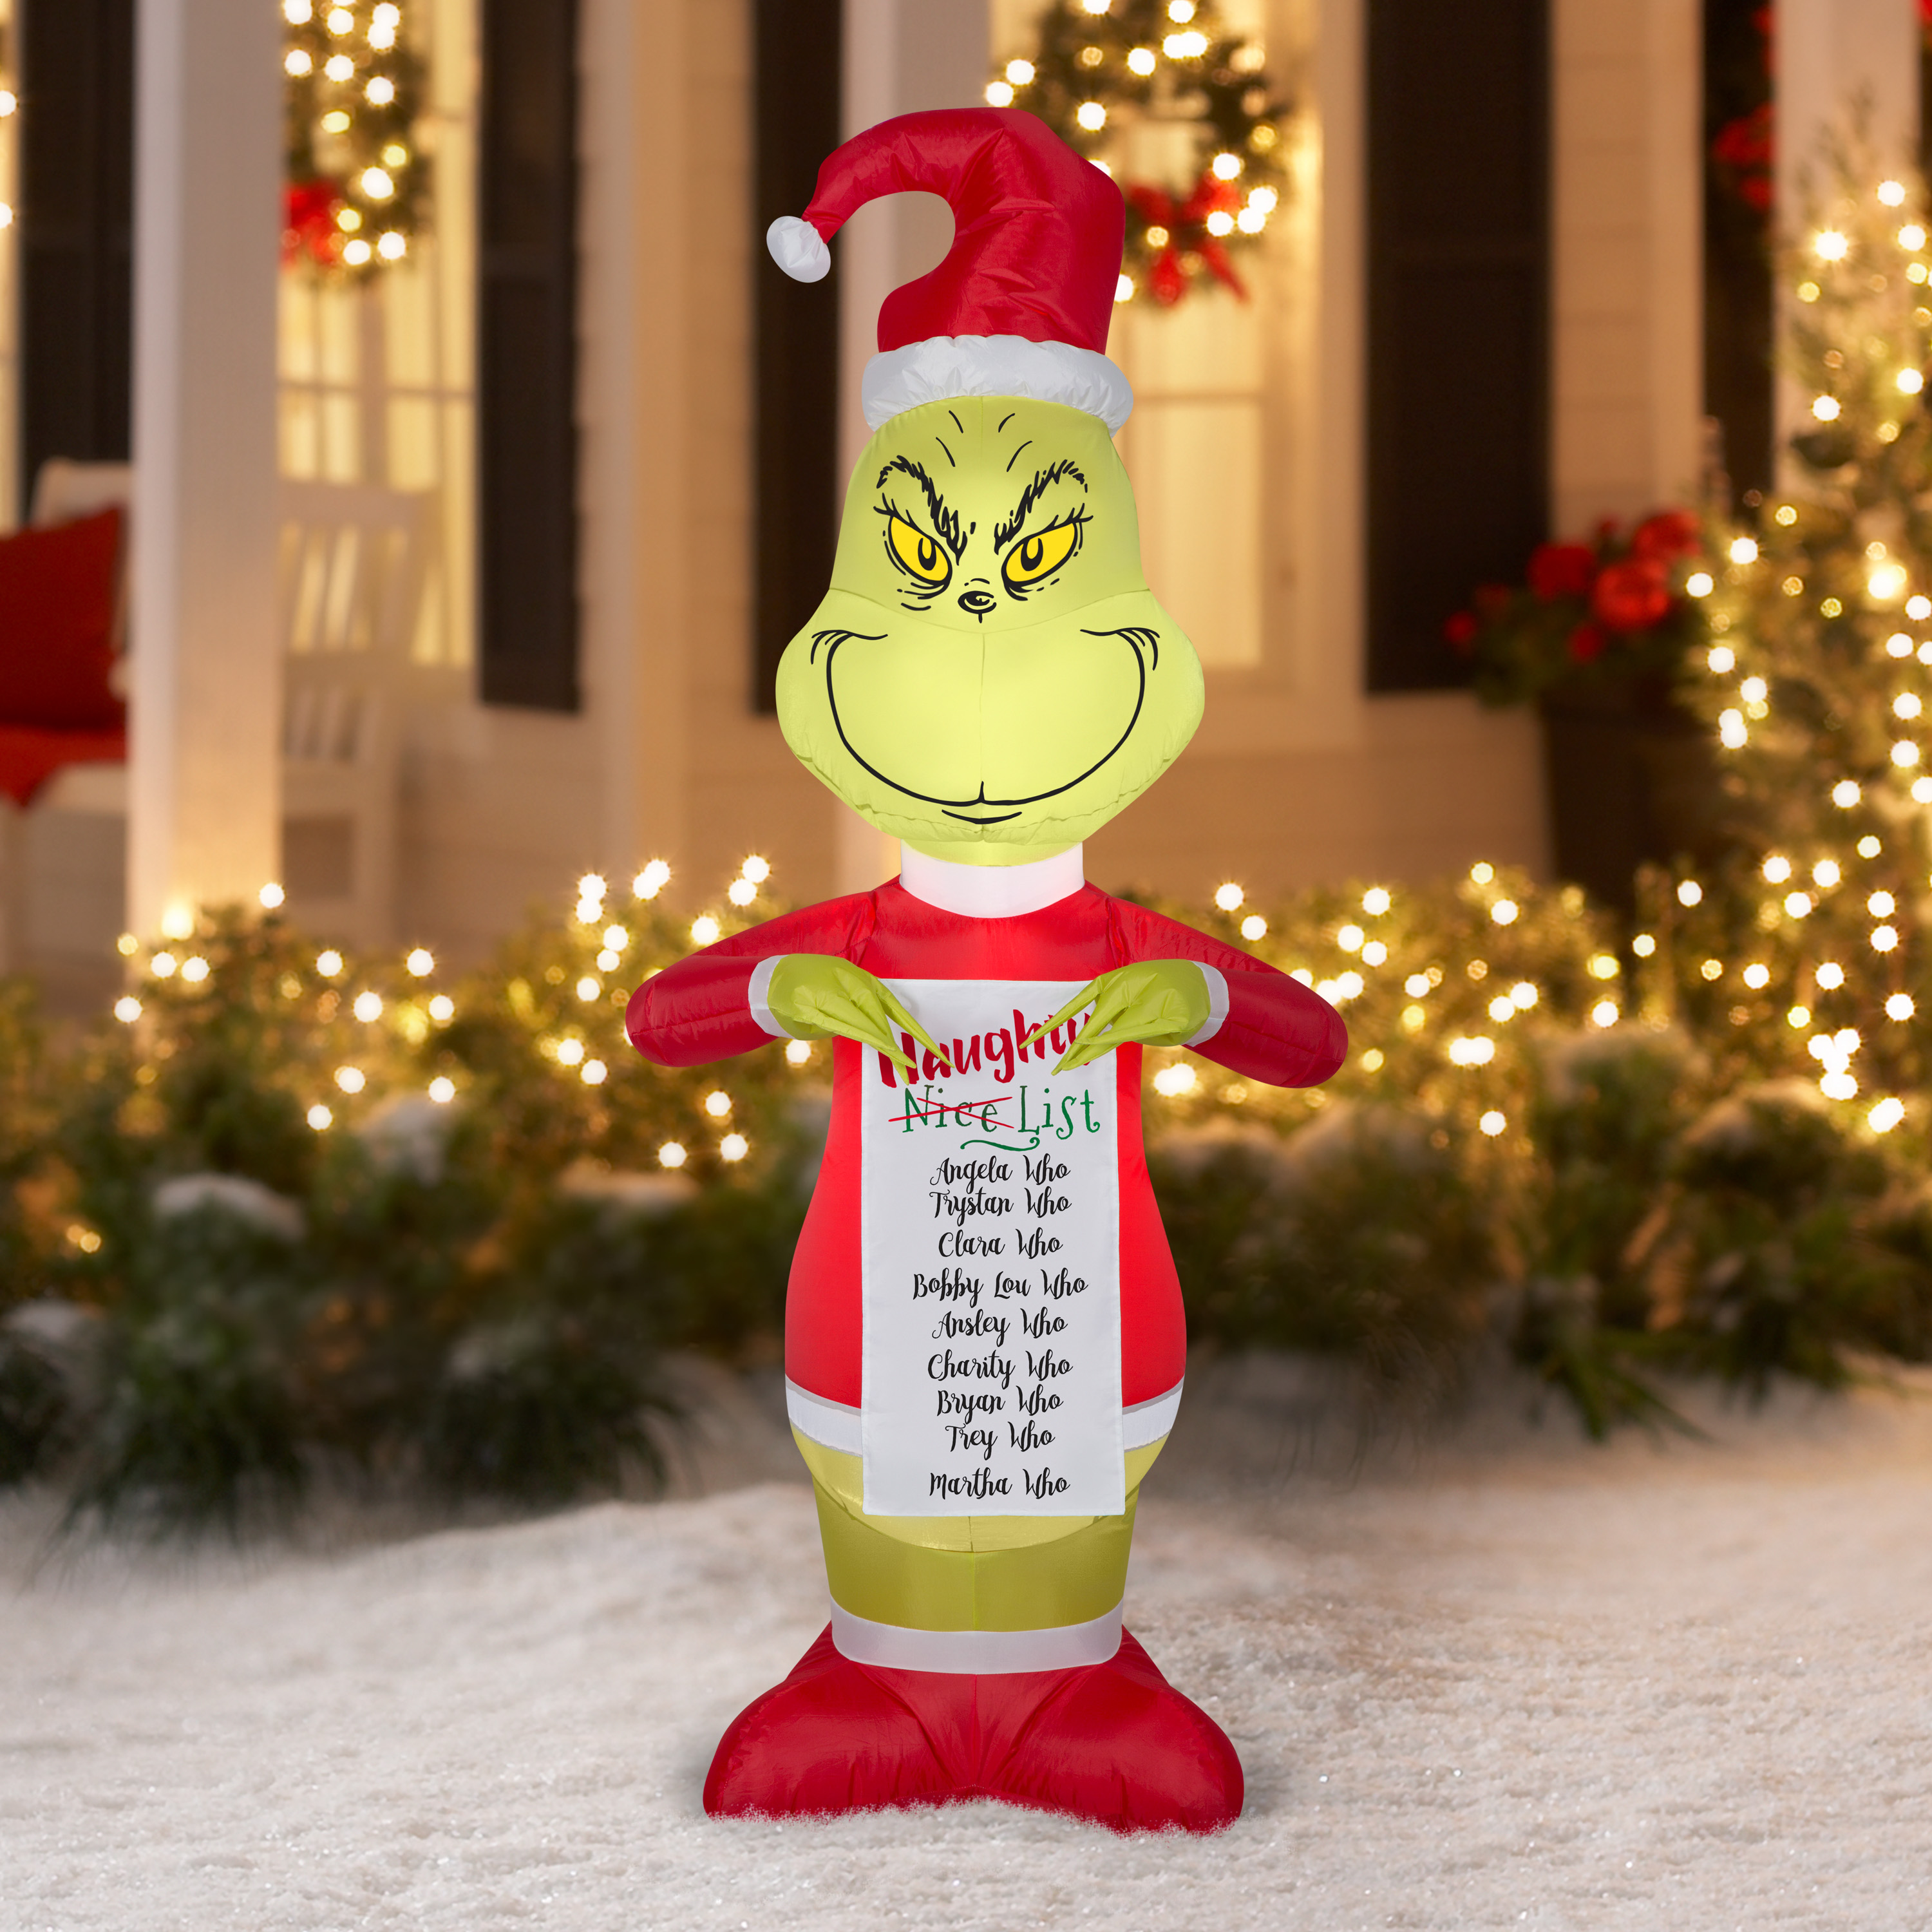 Dr. Seuss The Grinch Naughty List 5.5ft tall by Gemmy Industries - image 2 of 6